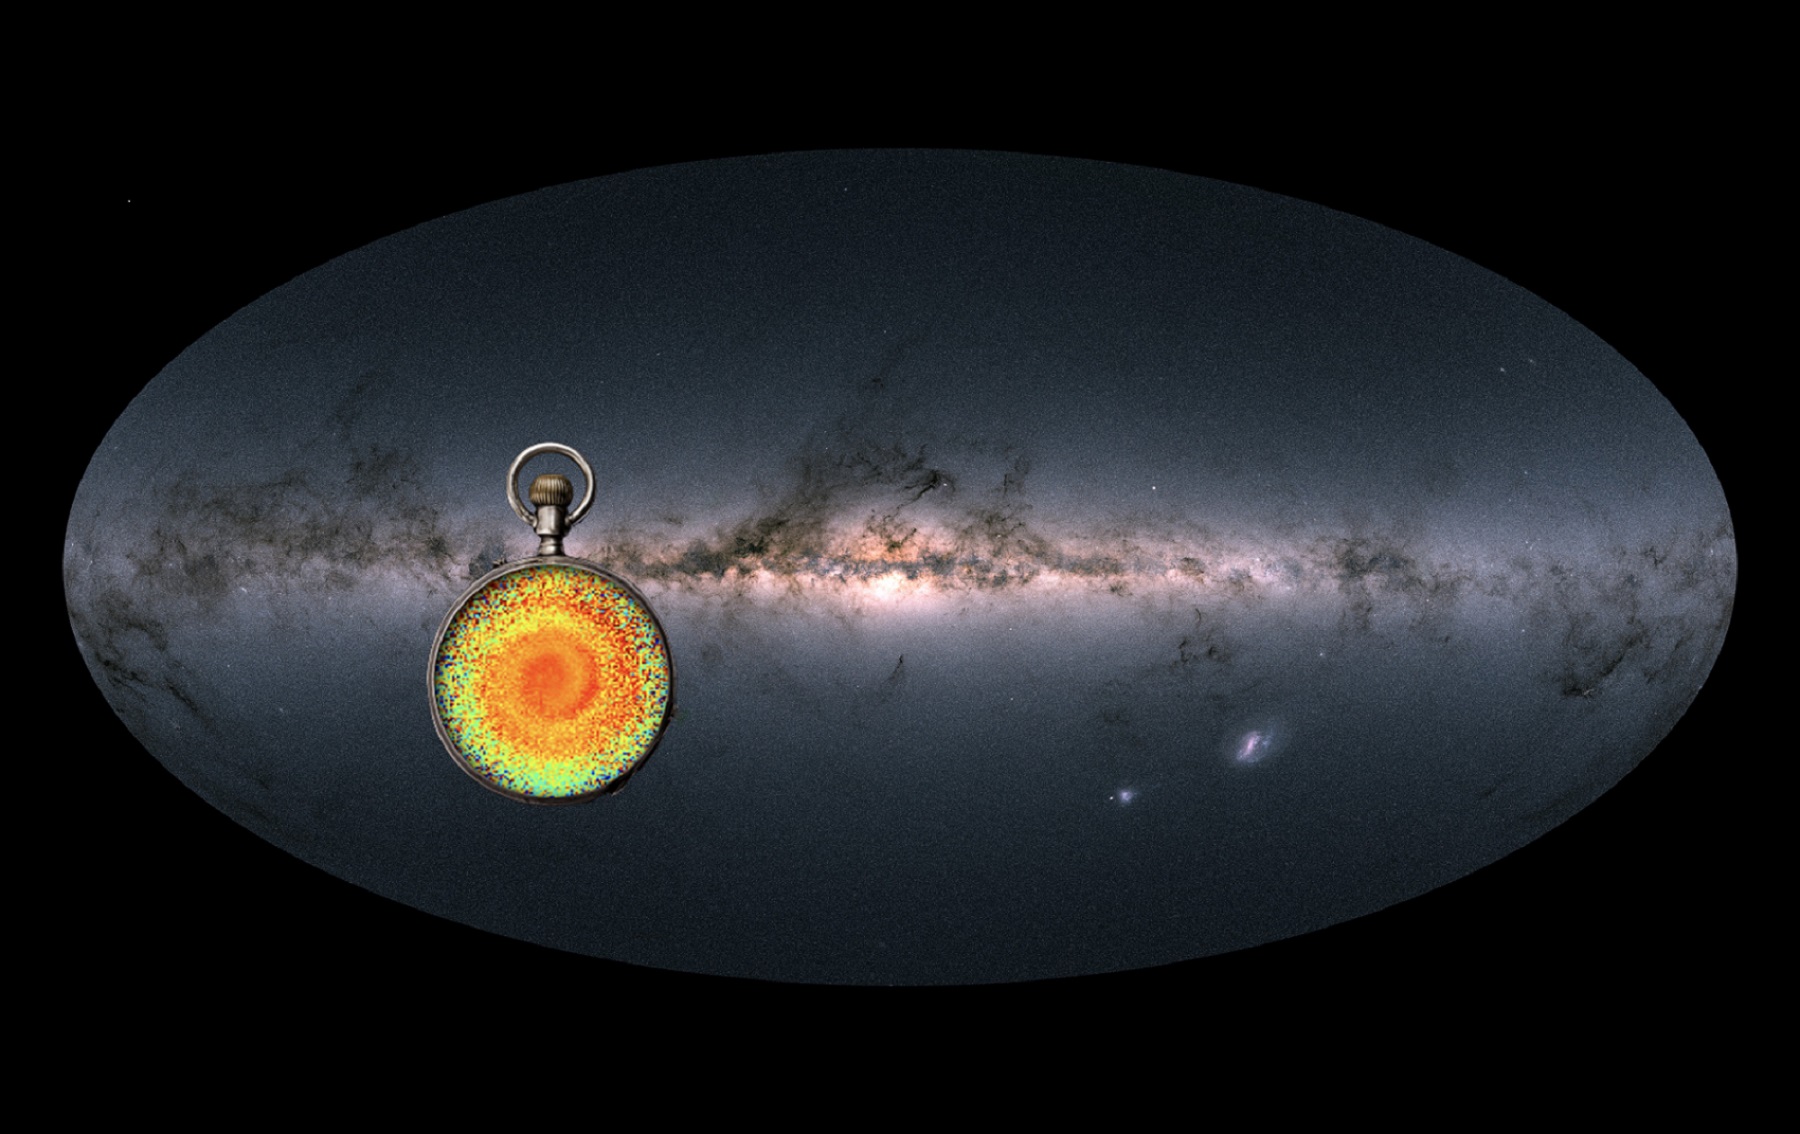 Artistic impression of the snail-like structure discovered by the team superimposed on a colour map of the Milky Way recently published by the Gaia collaboration (April 2018). The snail shell appears when combining the position and velocities of stars near the Sun. Its characteristics can be used to do galactic archeology: we can trace the origin of the snail shell to an encounter the Milky Way experienced in the recent past. (c): Edmon de Haro/iStock. Gaia sky in colours: ESA/Gaia/DPAC, A.Moitinho / A. F. Silva / M. Barros / C. Barata, University of Lisbon, Portugal; H. Savietto, Fork Research, PortugalArtistic impression of the snail-like structure discovered by the team superimposed on a colour map of the Milky Way recently published by the Gaia collaboration (April 2018). The snail shell appears when combining the position and velocities of stars near the Sun. Its characteristics can be used to do galactic archeology: we can trace the origin of the snail shell to an encounter the Milky Way experienced in the recent past. (c): Edmon de Haro/iStock. Gaia sky in colours: ESA/Gaia/DPAC, A.Moitinho / A. F. Silva / M. Barros / C. Barata, University of Lisbon, Portugal; H. Savietto, Fork Research, Portugal